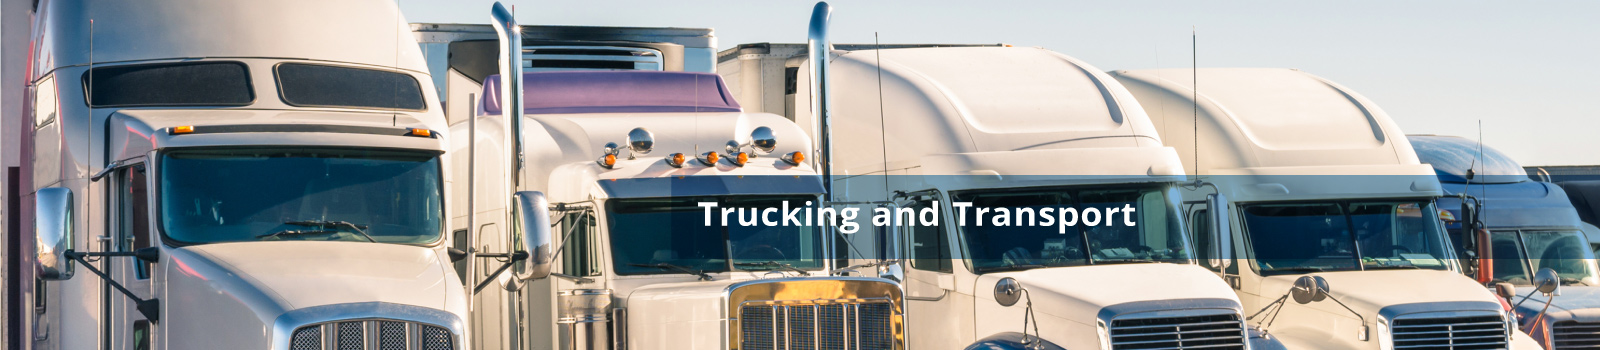 Trucking and Transport